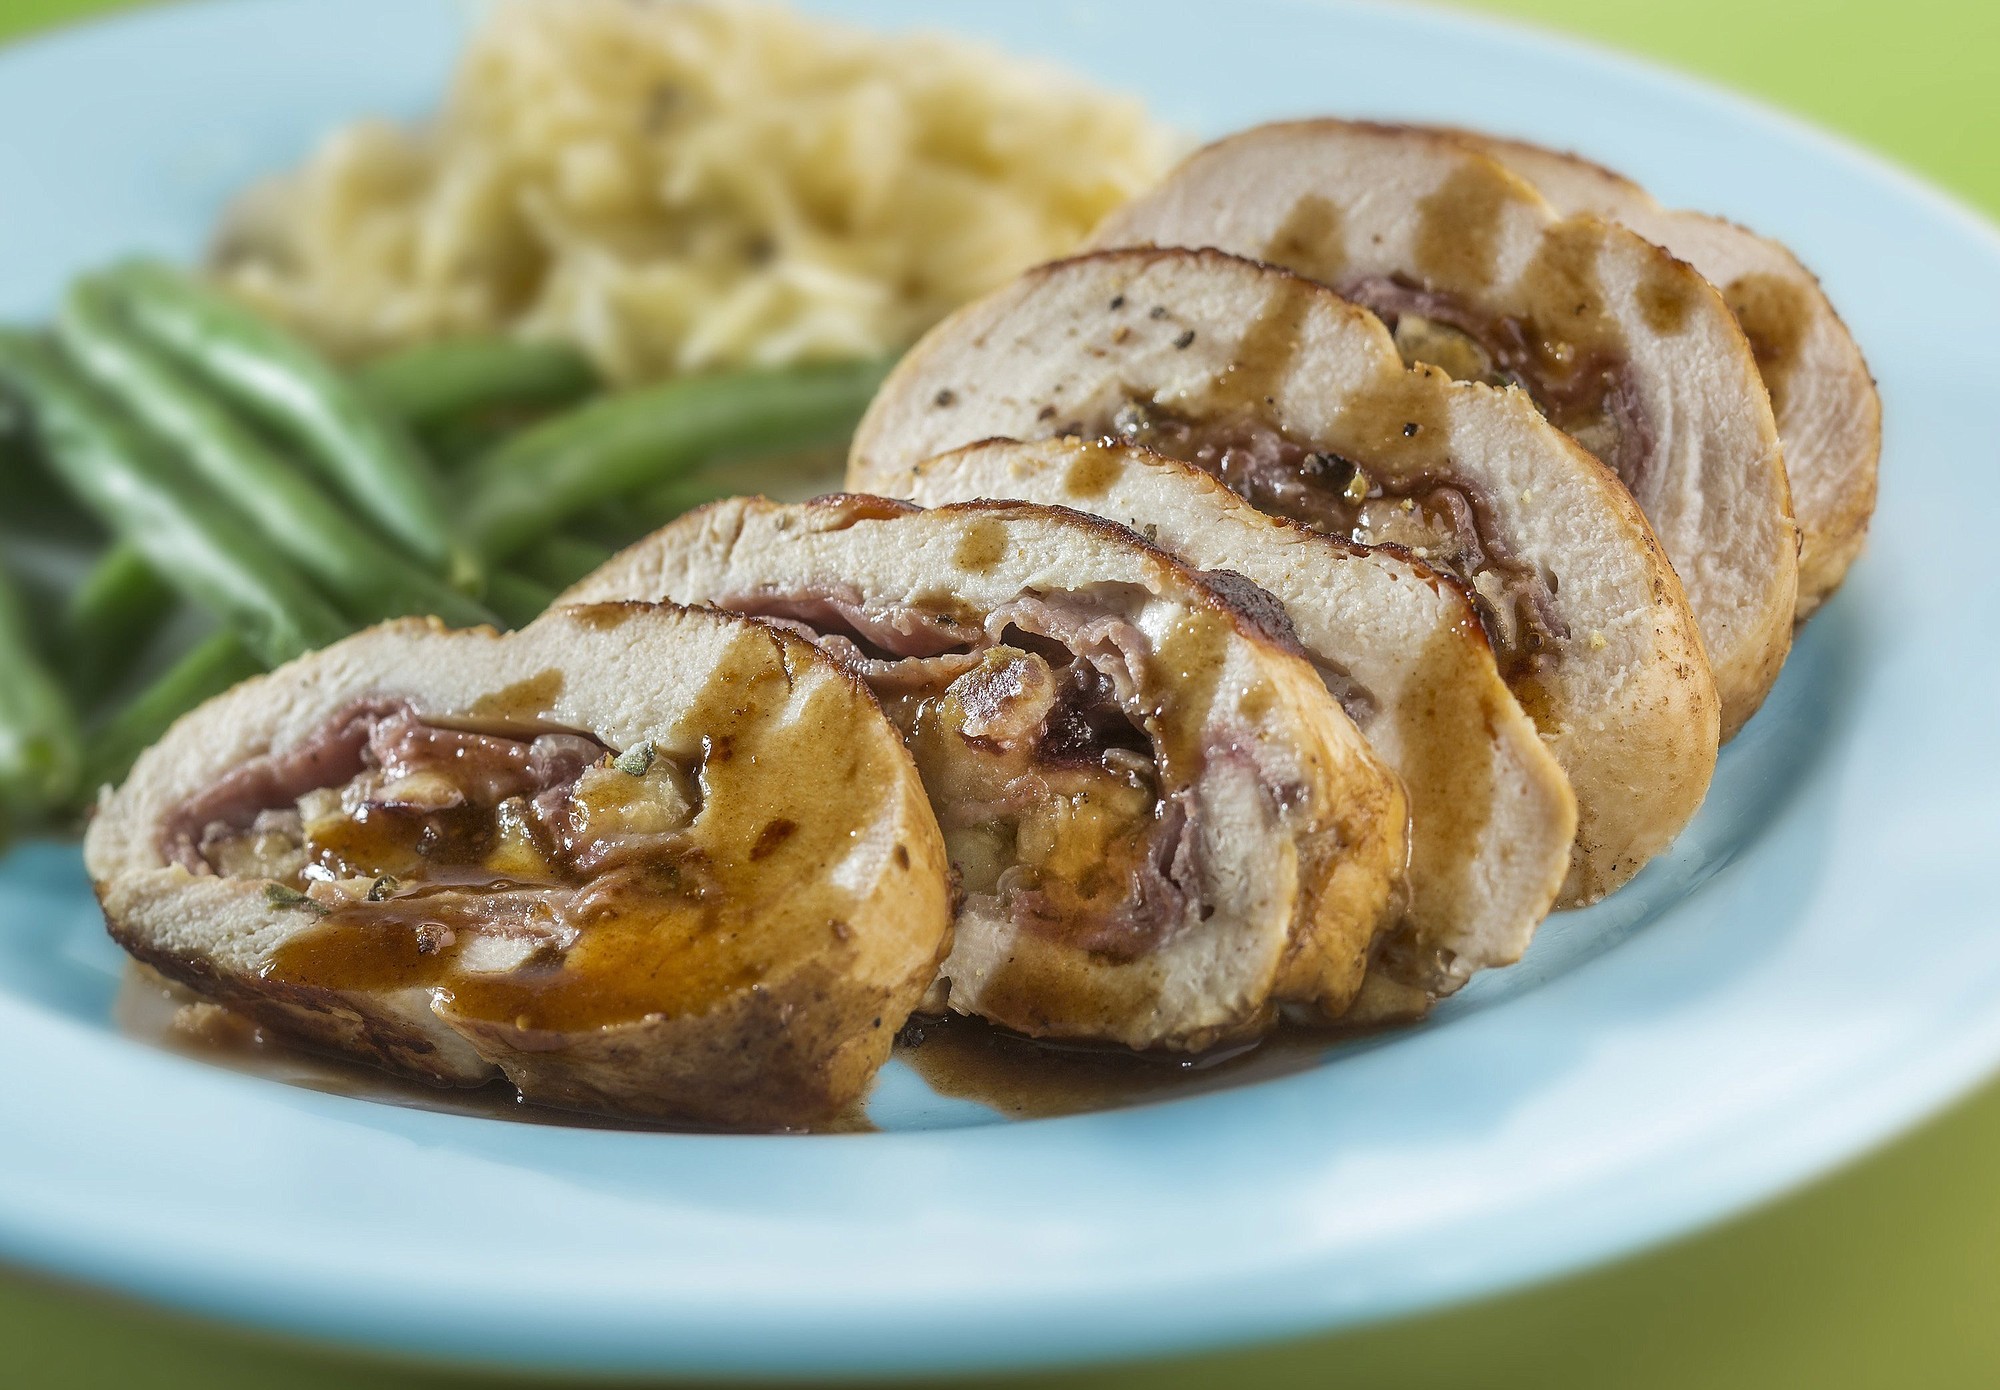 Fresh figs, prosciutto and Comte cheese fill a chicken breast, served with a simple pan sauce.